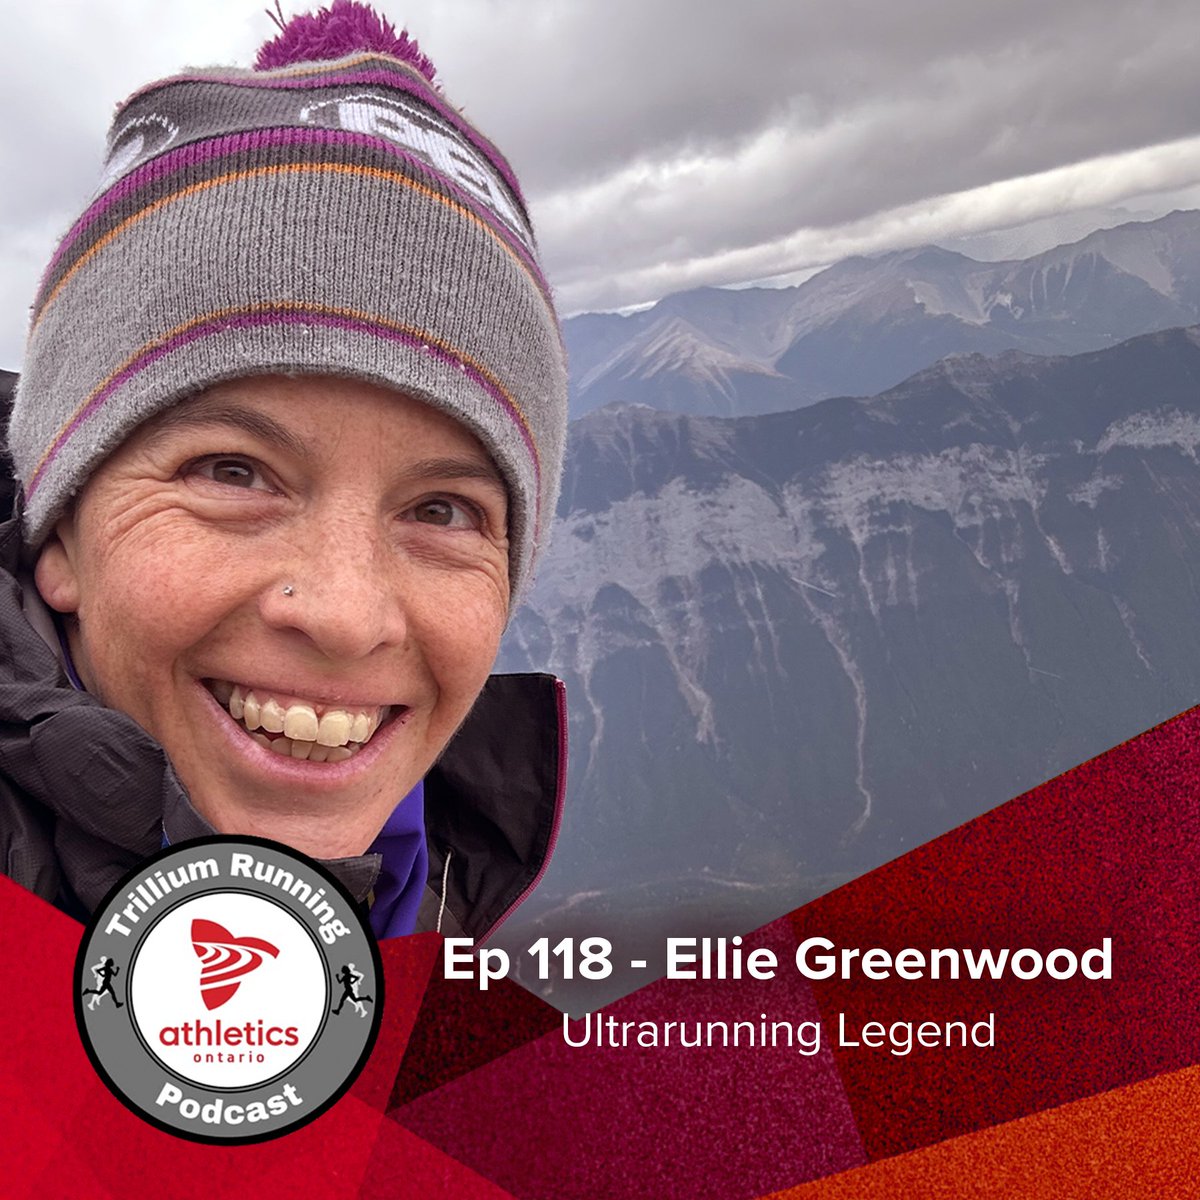 .@eLLiejG talks to John Shep about her 2 victories at @wser about community and competition. Also @RacingTrails talks about their latest sold-out and inaugural Blaze Race. Listen here: athleticsontario.ca/road-trail-run…